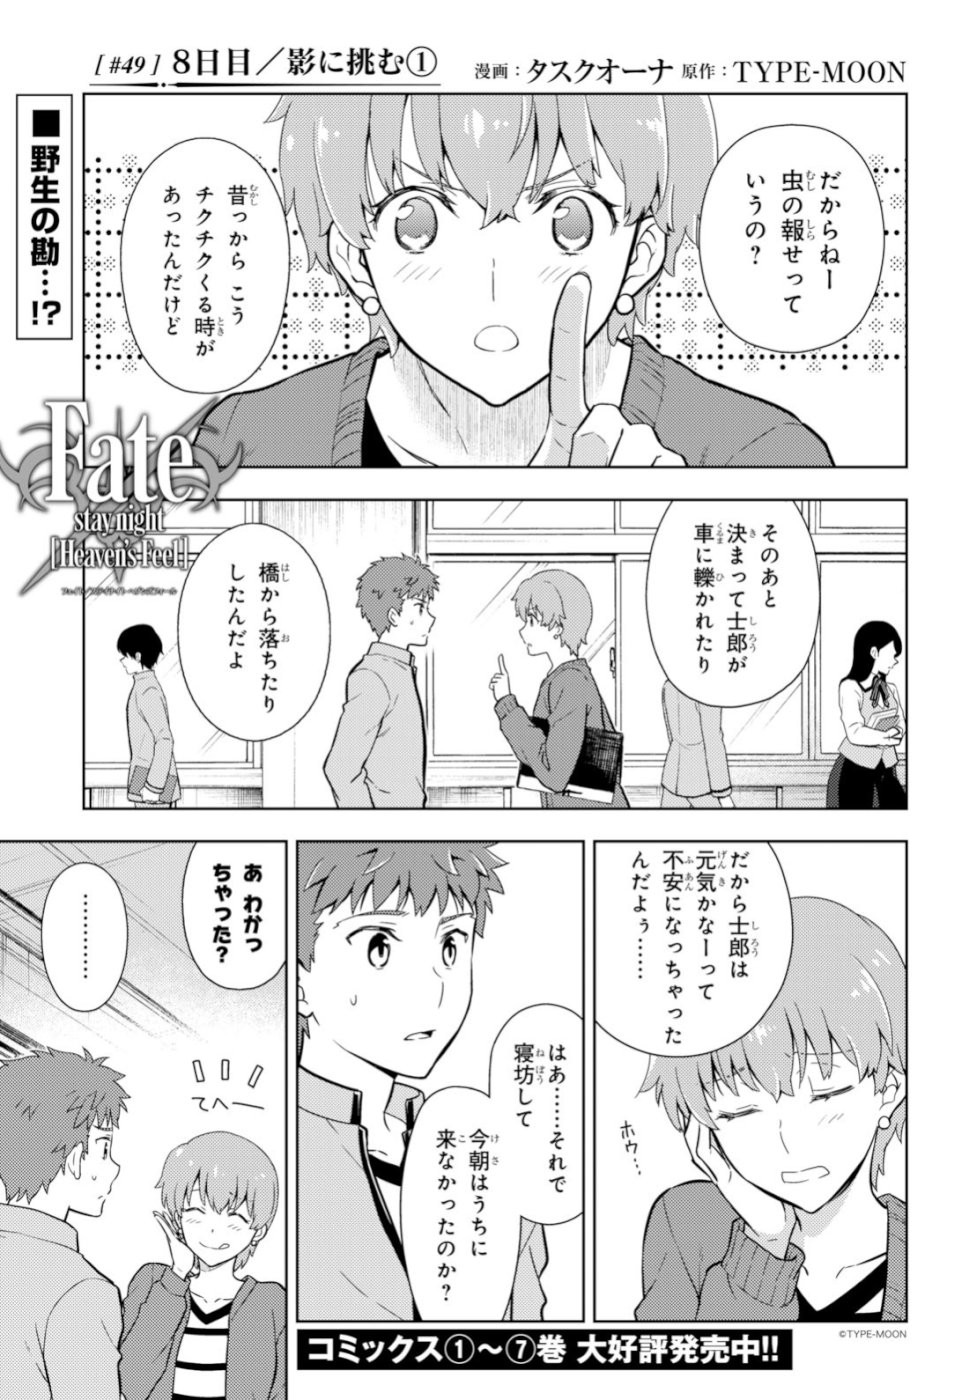 Fate/Stay night Heaven's Feel - Chapter 49 - Page 1